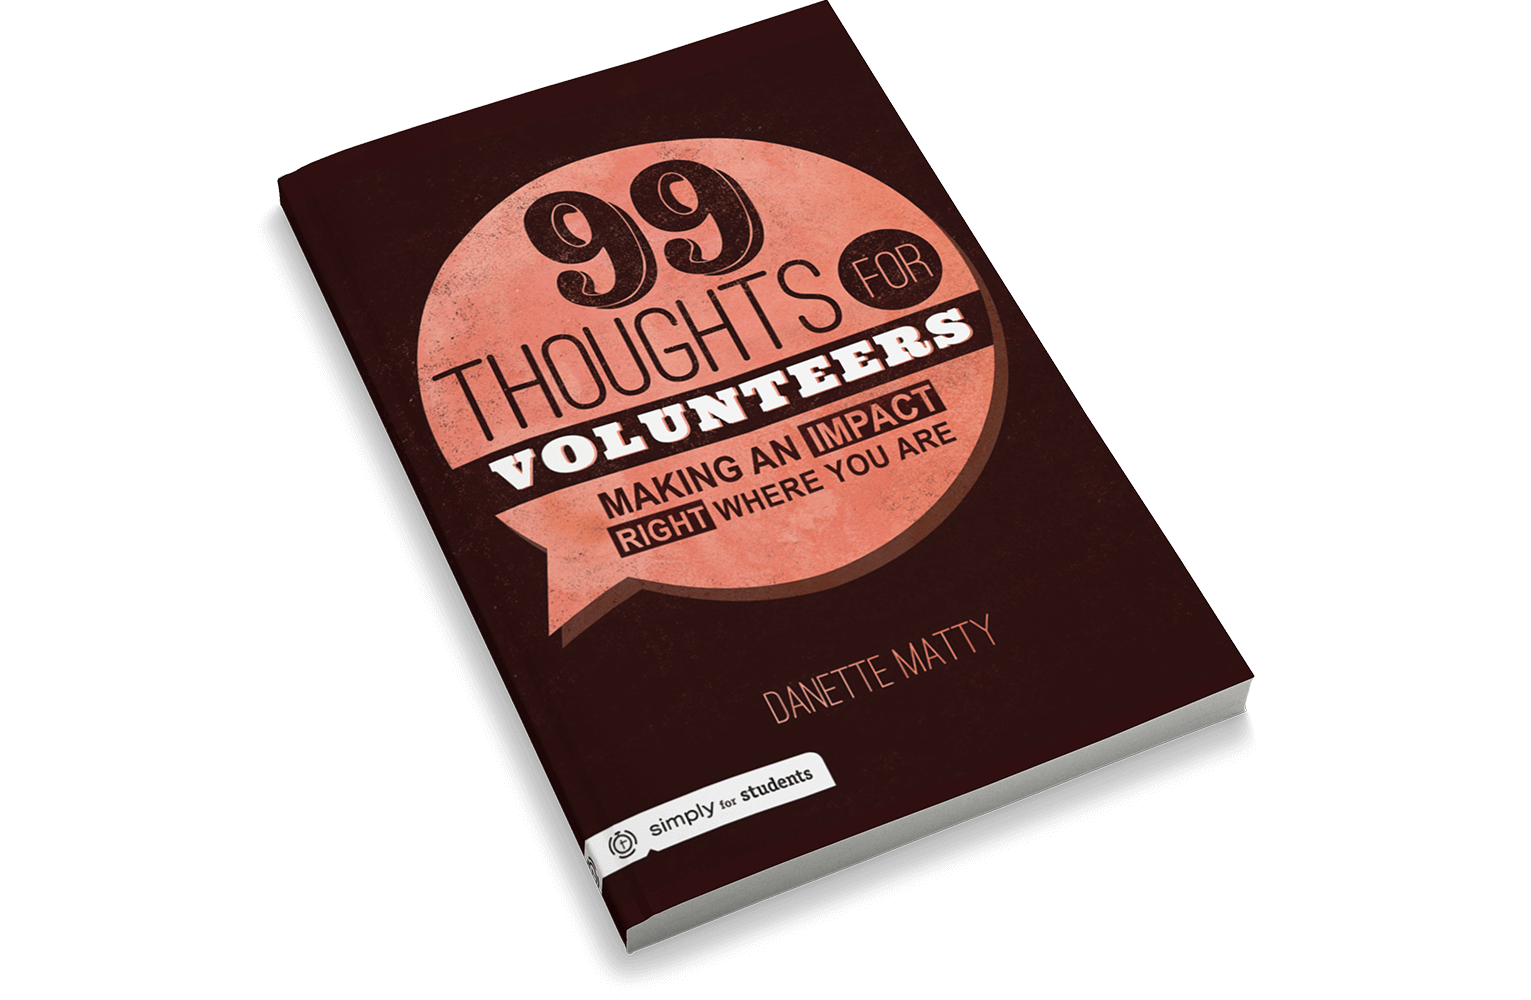 99 Thoughts for Volunteers: Making an Impact Right Where You Are